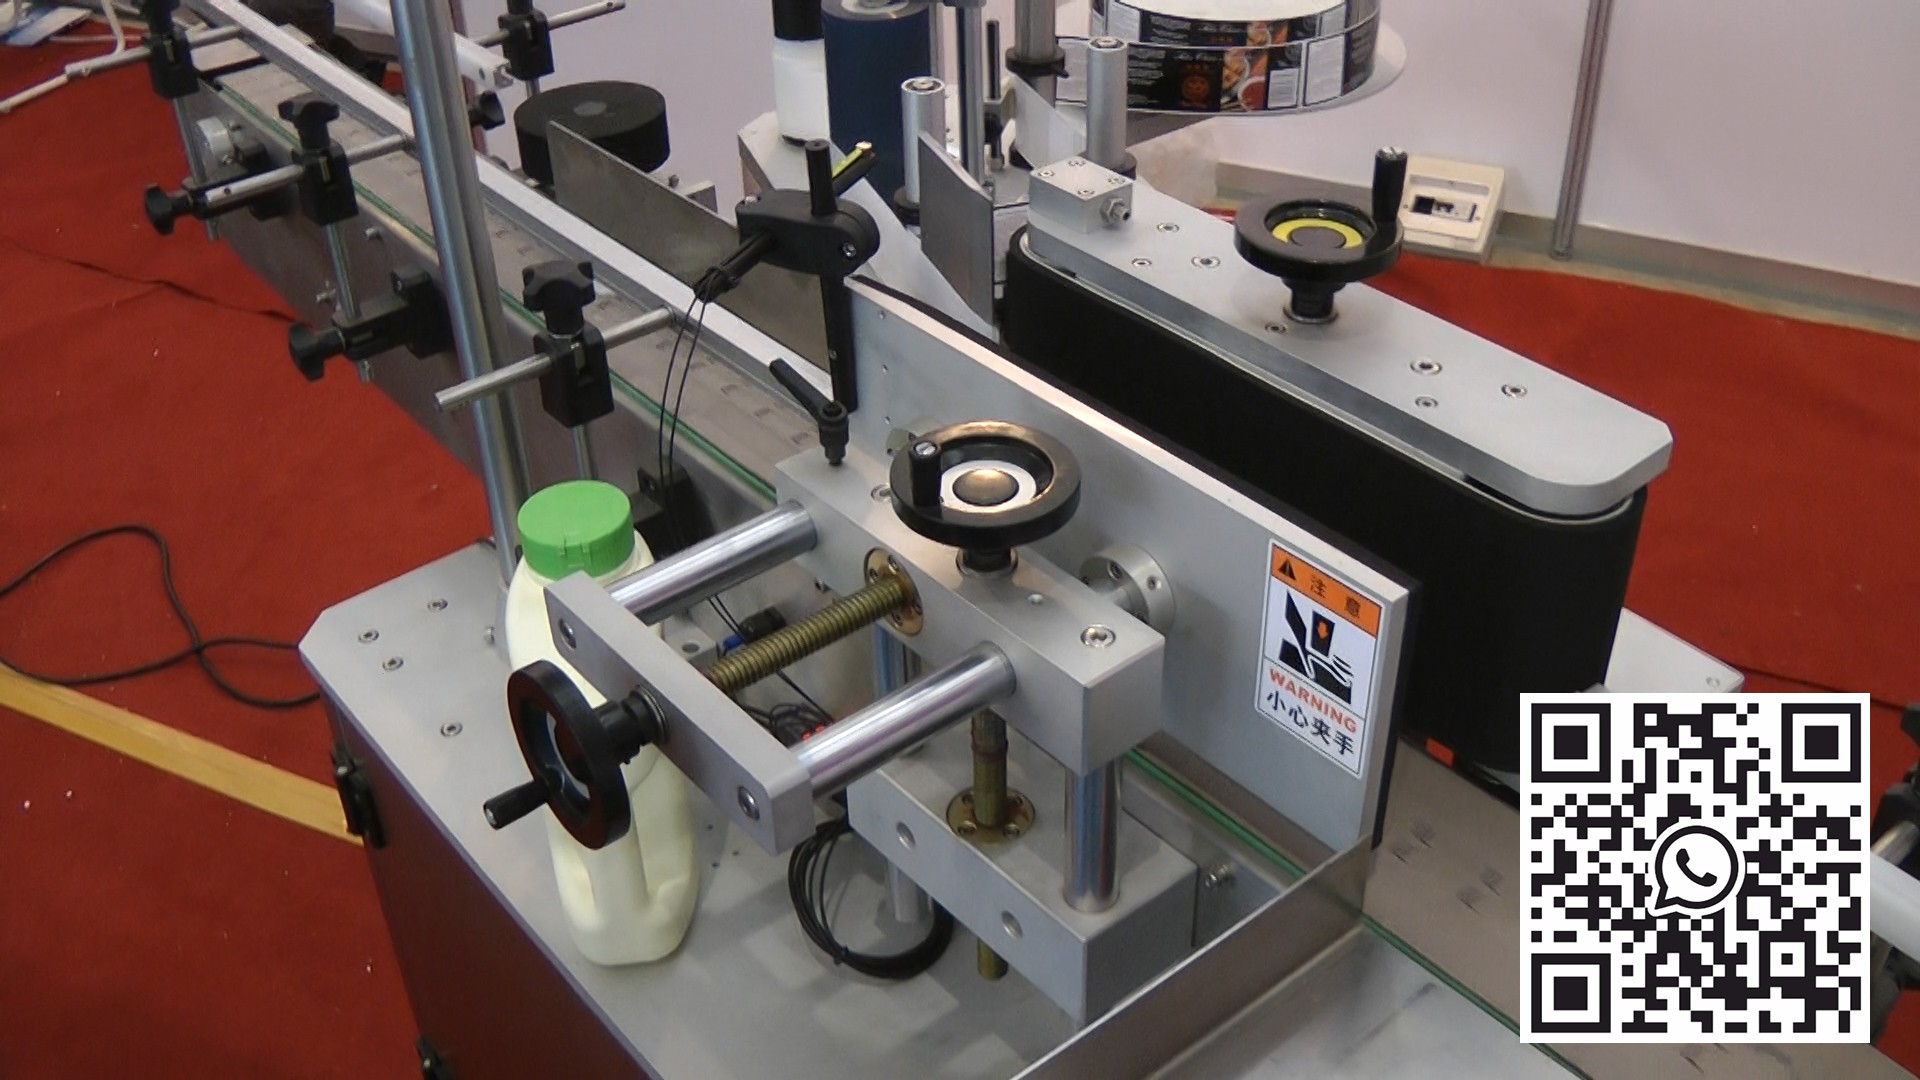 Automatic labeling equipment for bottles in pharmaceutical production